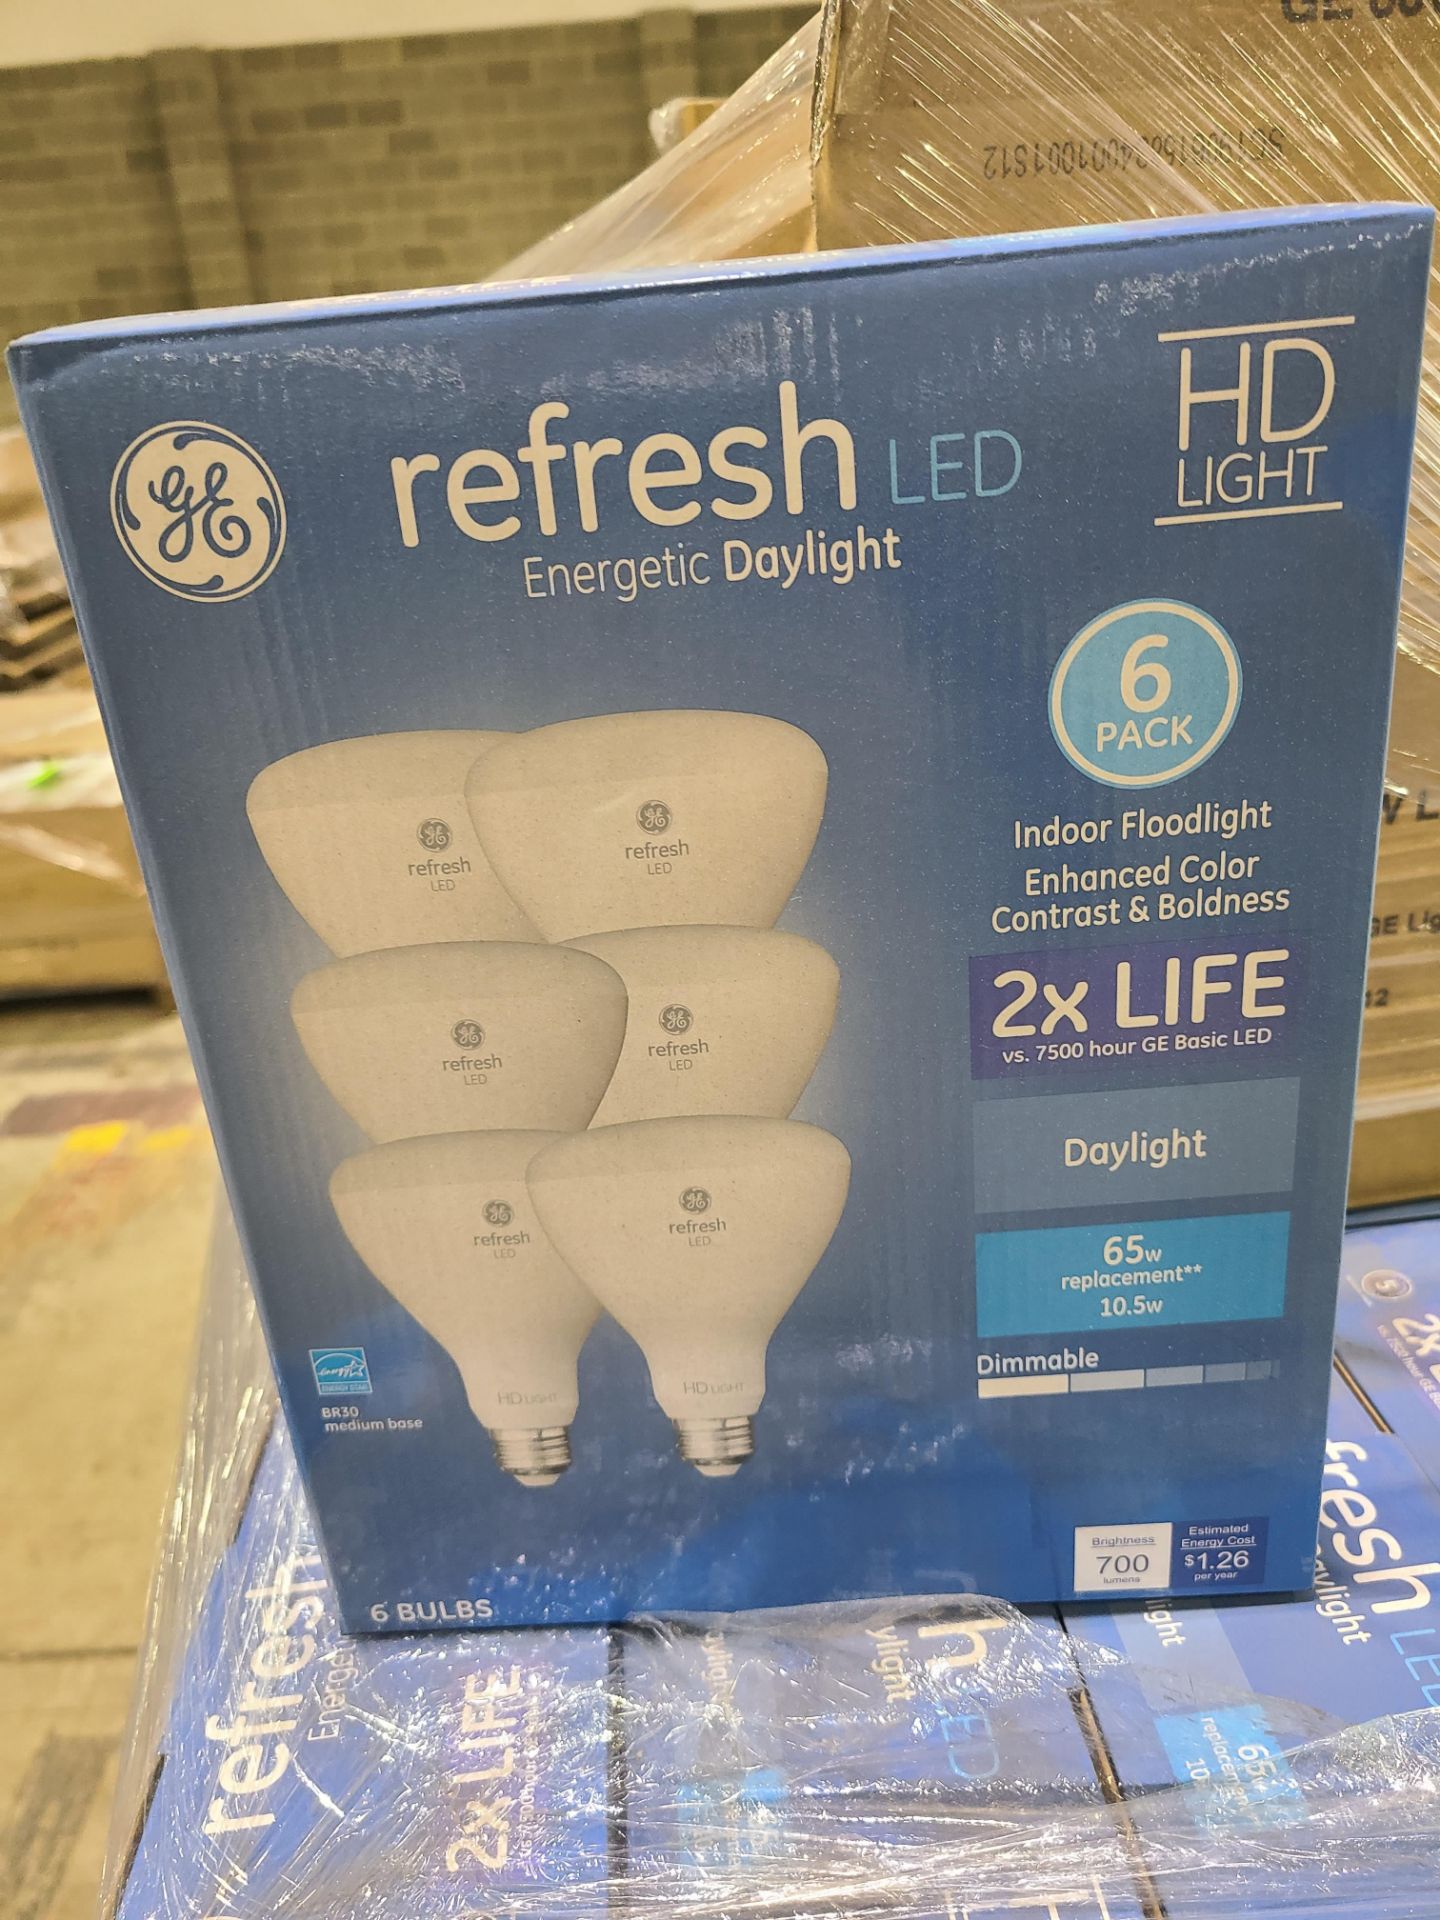 (876) GE REFRESH DIMMABLE LED FLOODLIGHT - Image 2 of 2